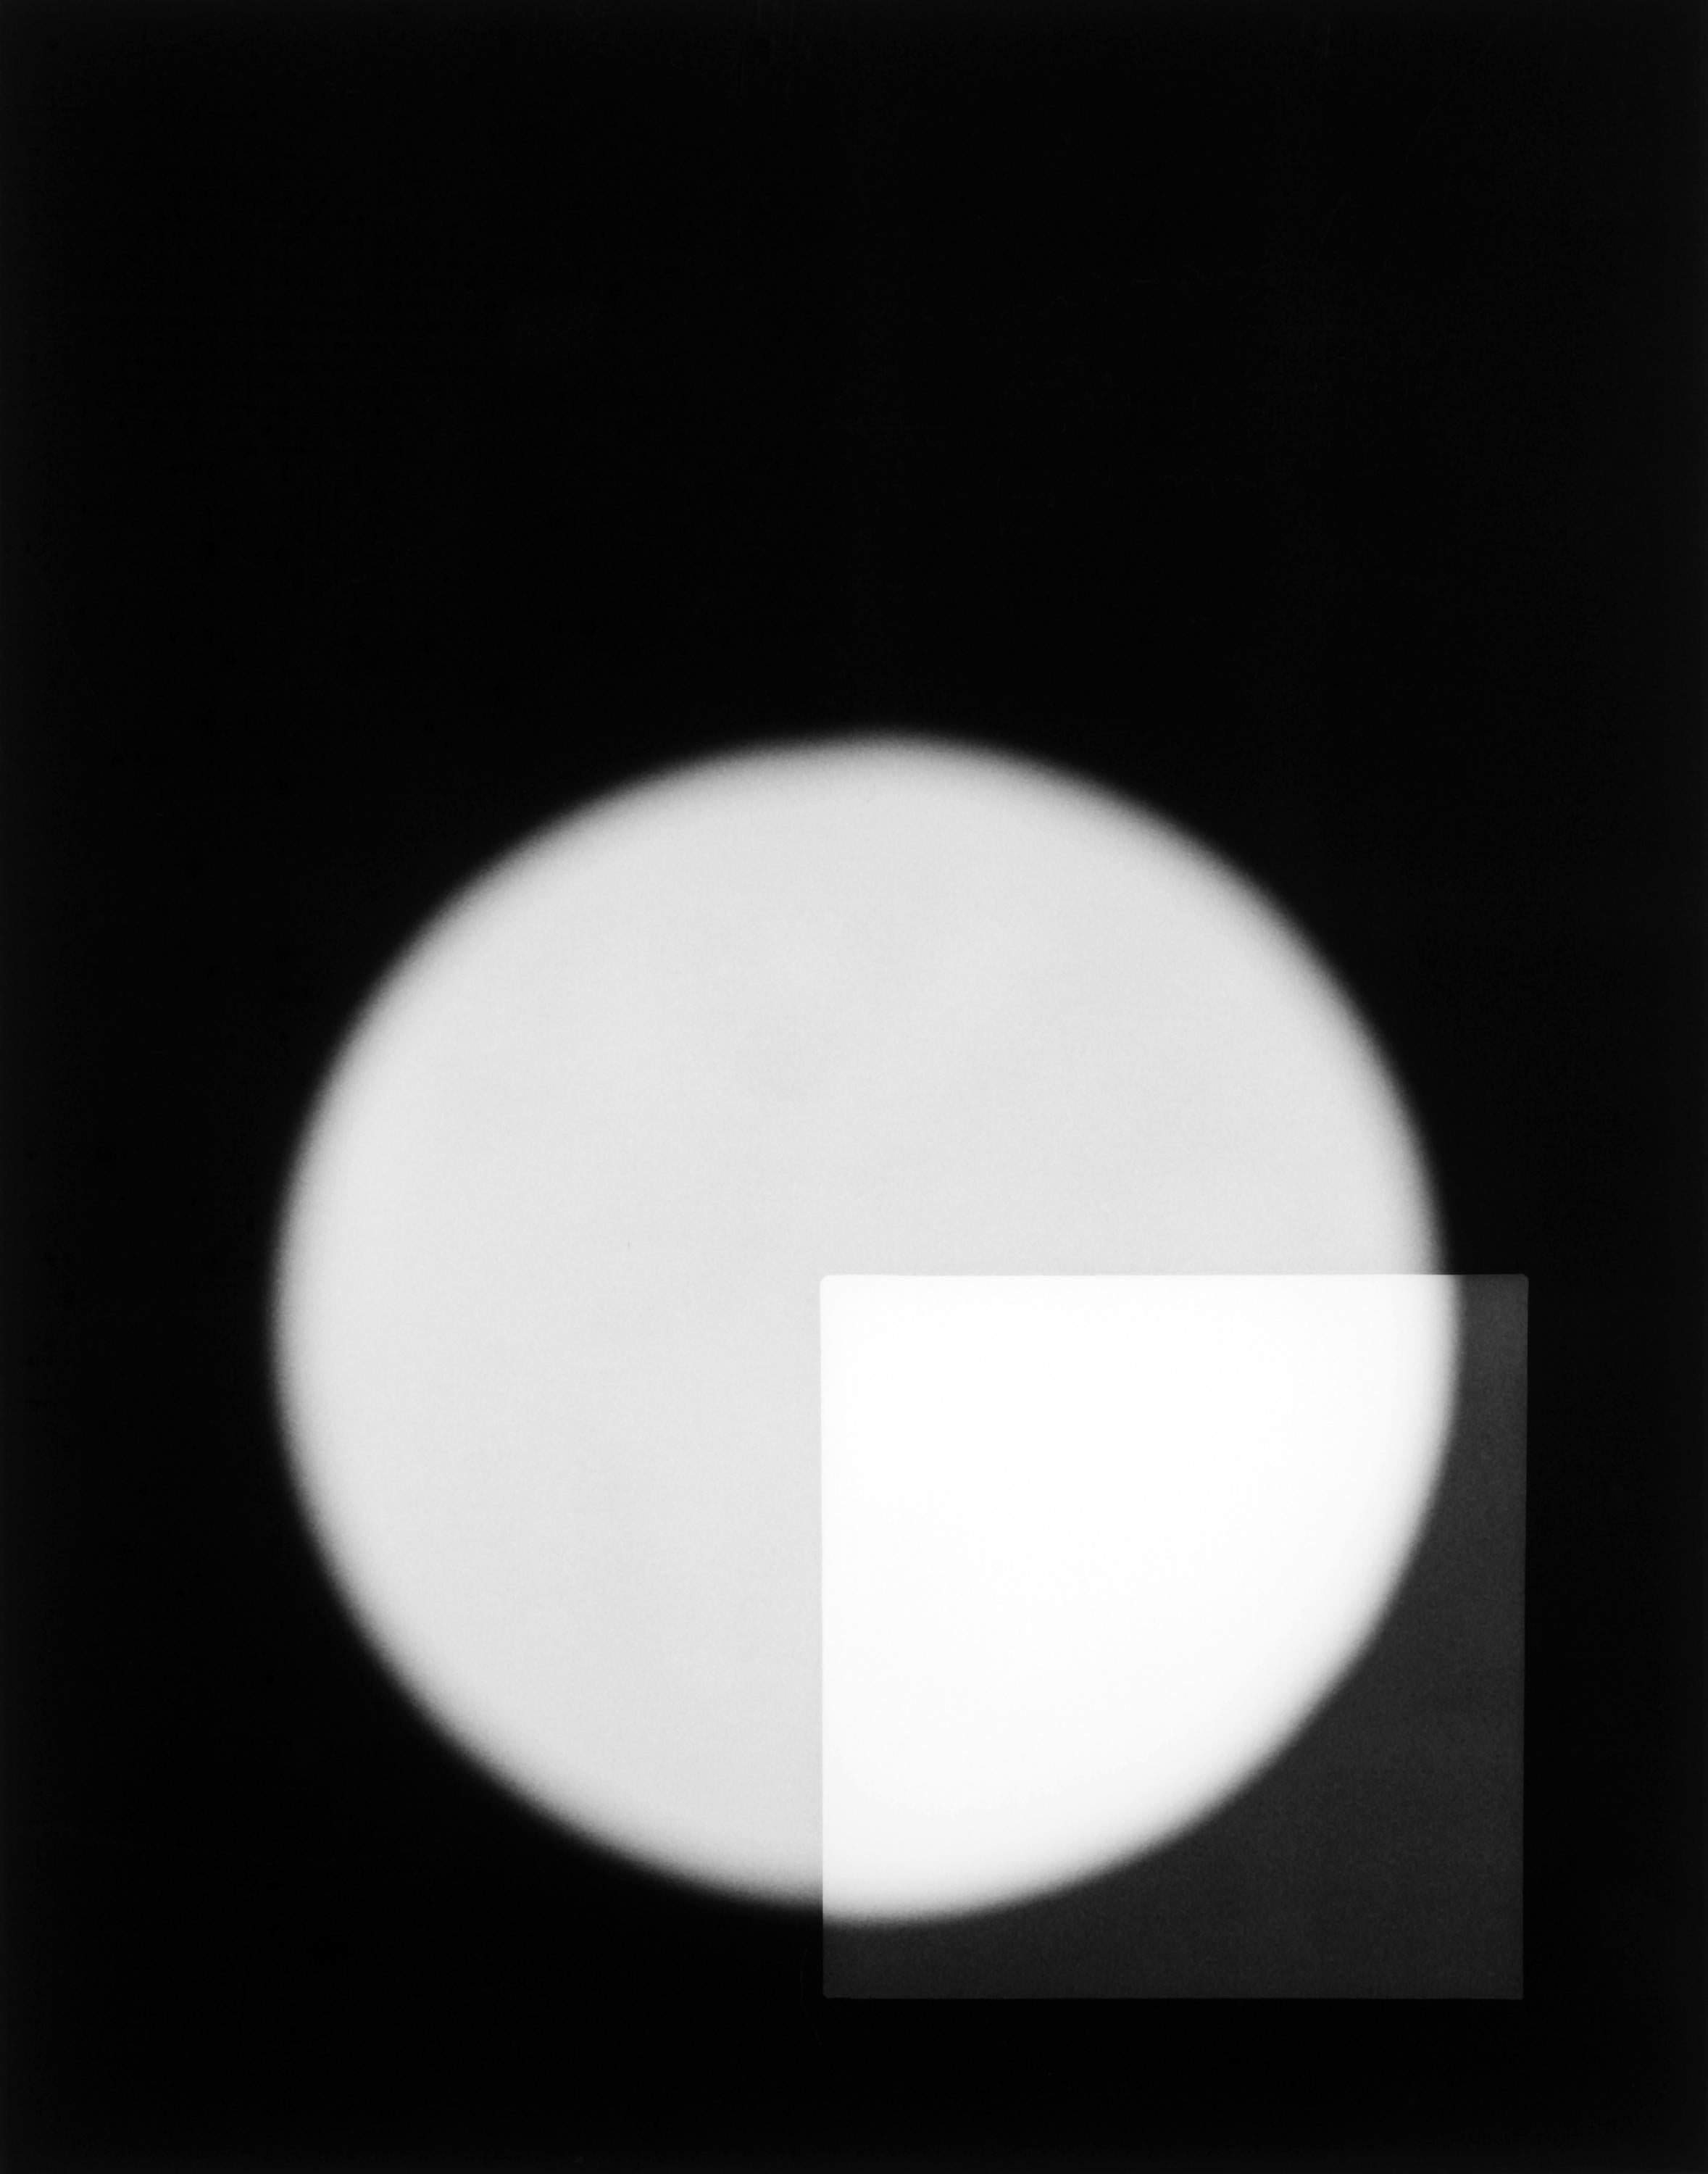 Philip Augustin, Negative #18-006-14 with photogram, 2018, Image Size: 14 x 11", Matted size: 24 x 20", silver gelatin print, edition of 5, signed, editioned, titled and dated on print verso. [photogram, cameraless photography, circle, shape, form].